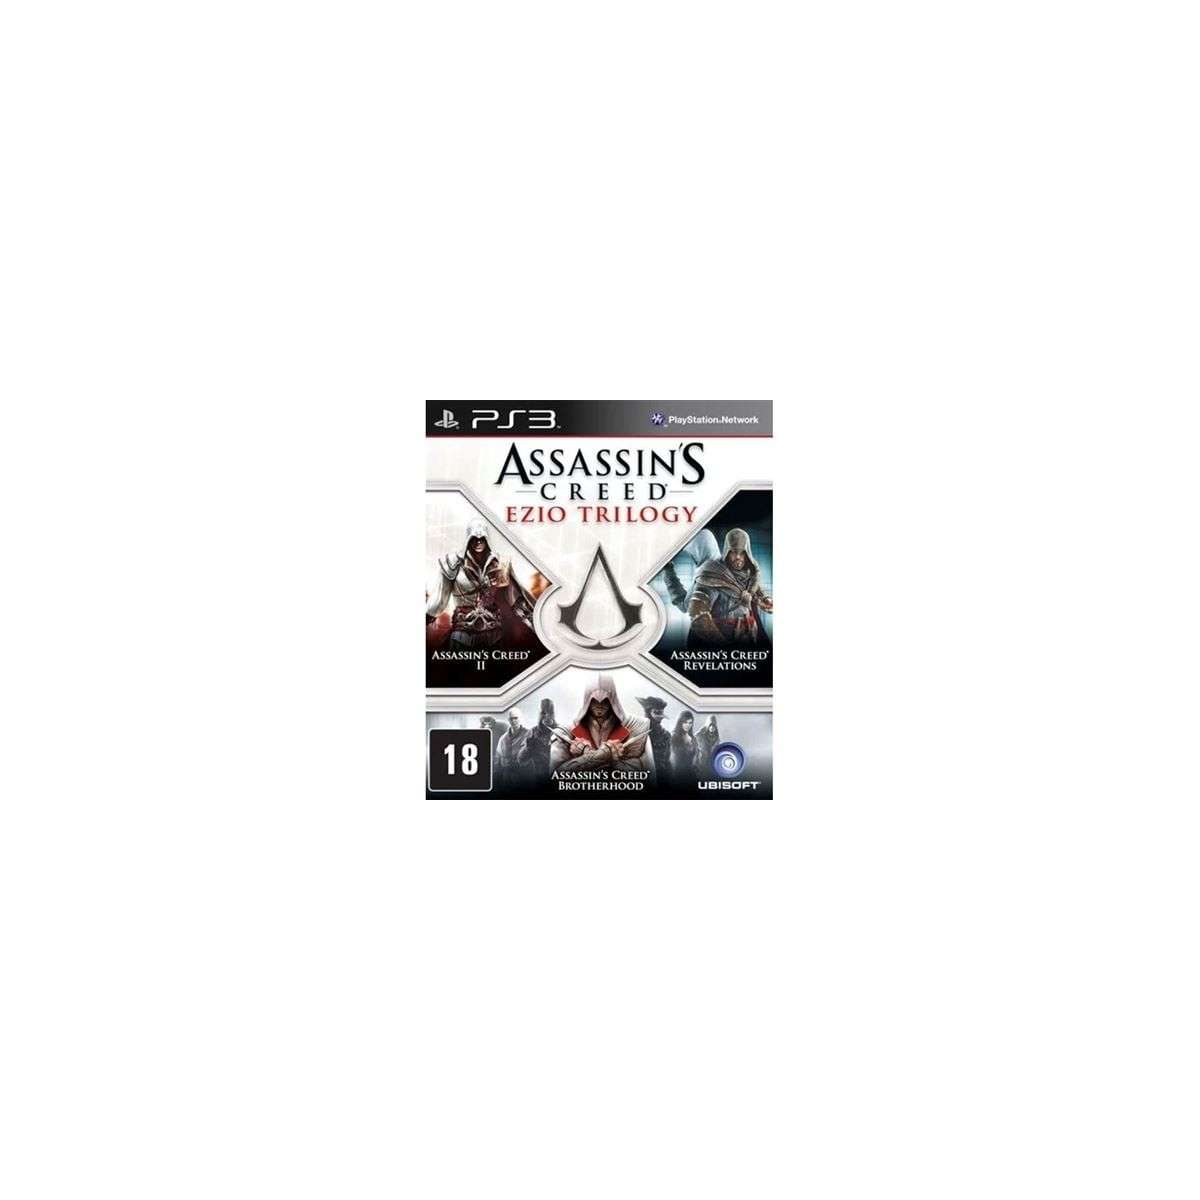 Assassins Creed Ezio Trilogy 3 RPG Action Adventure Games Sony PS3  Playstation 3